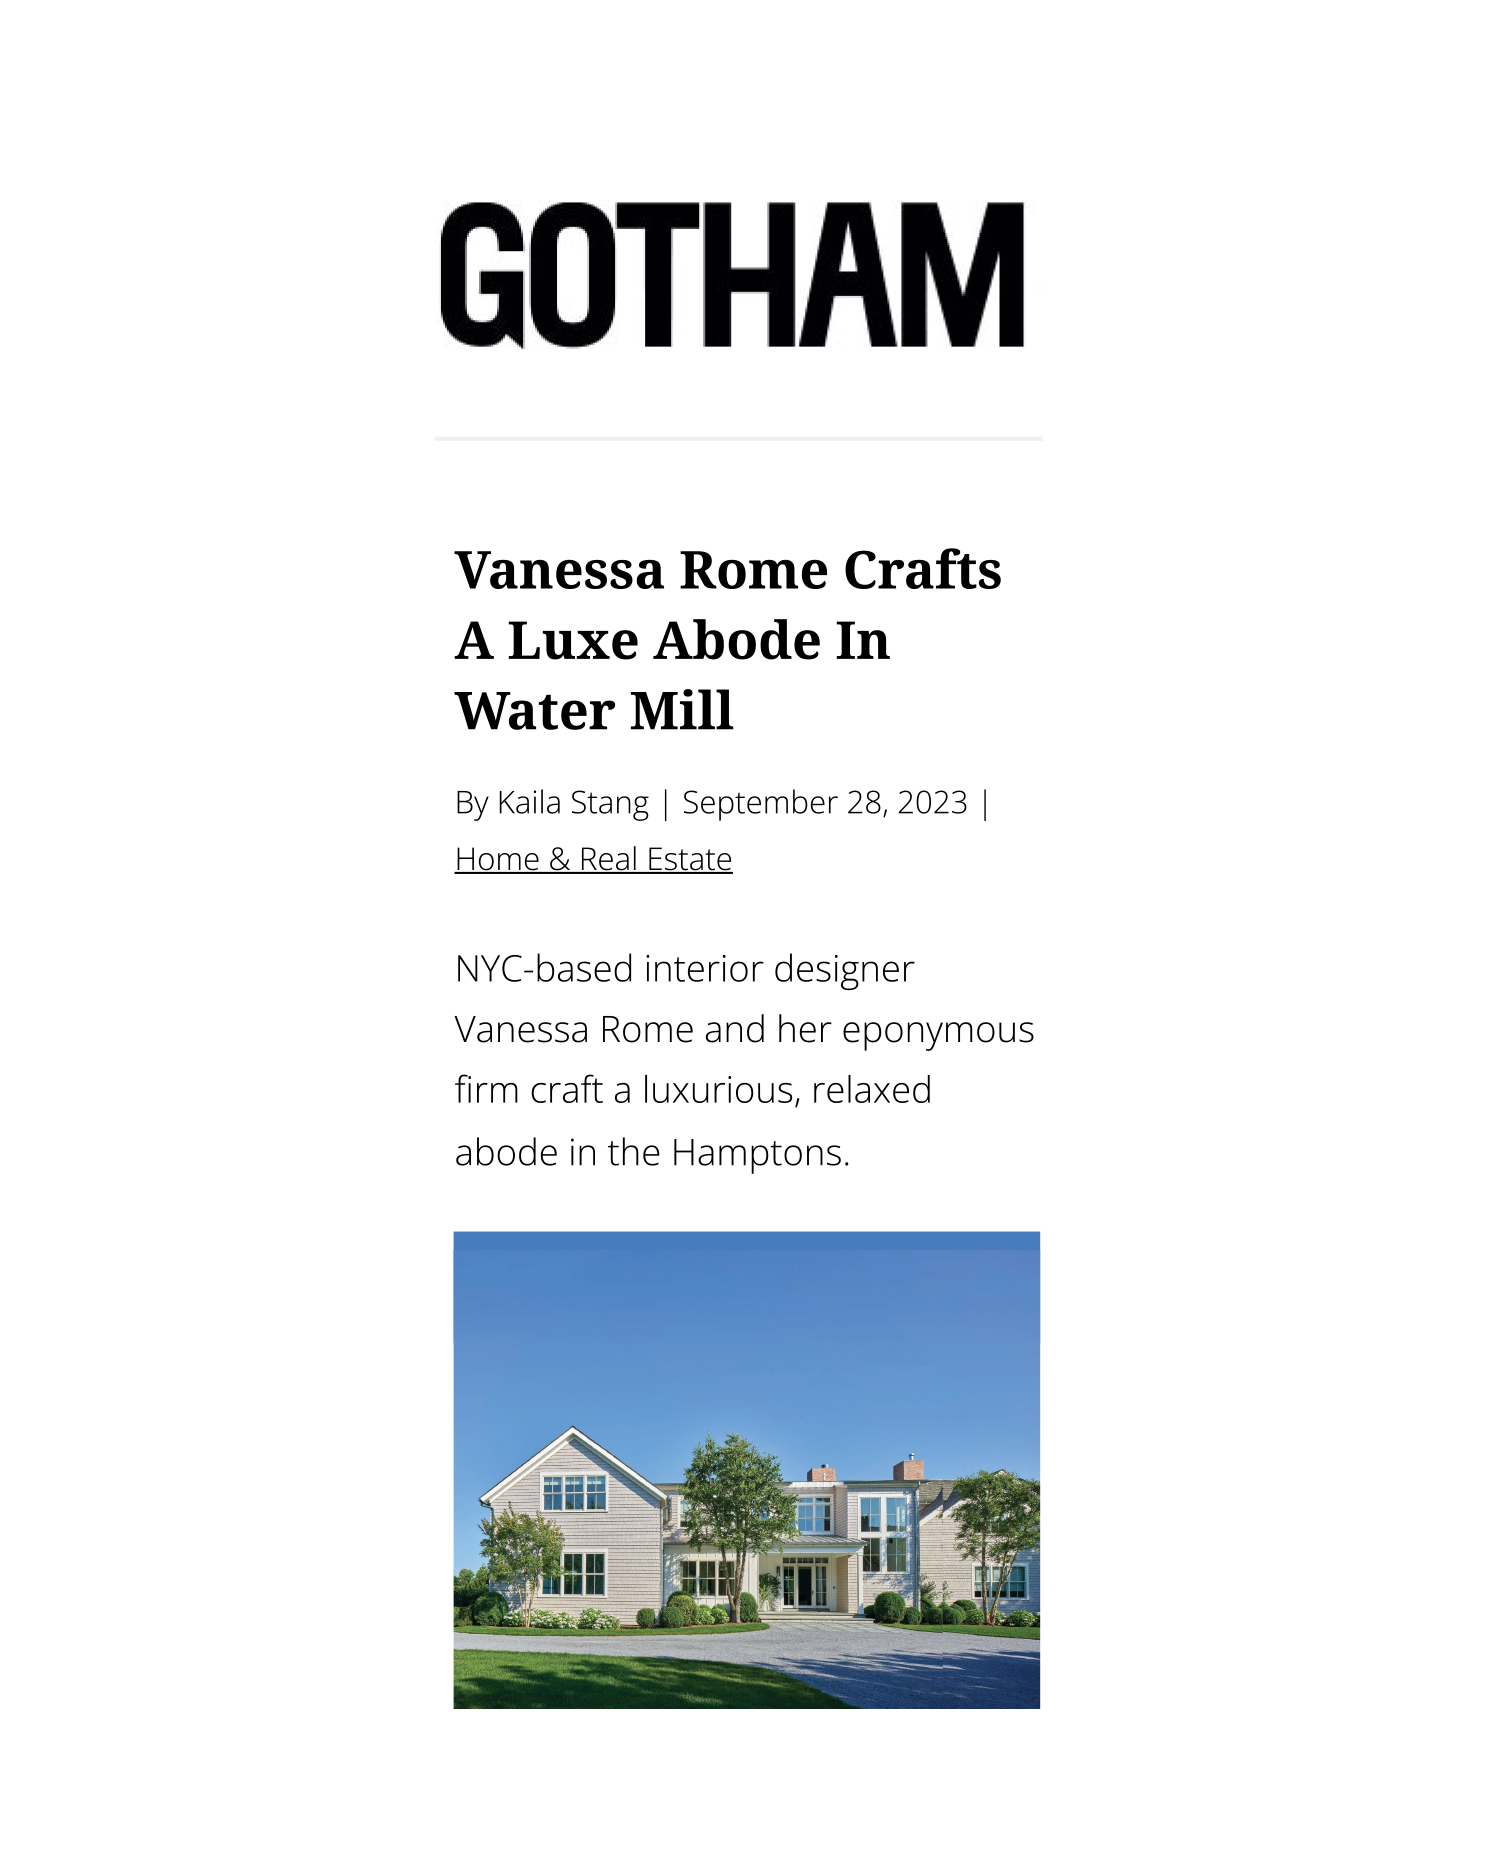 Gotham - Vanessa Rome Crafts A Luxe Abode In Water Mill.png